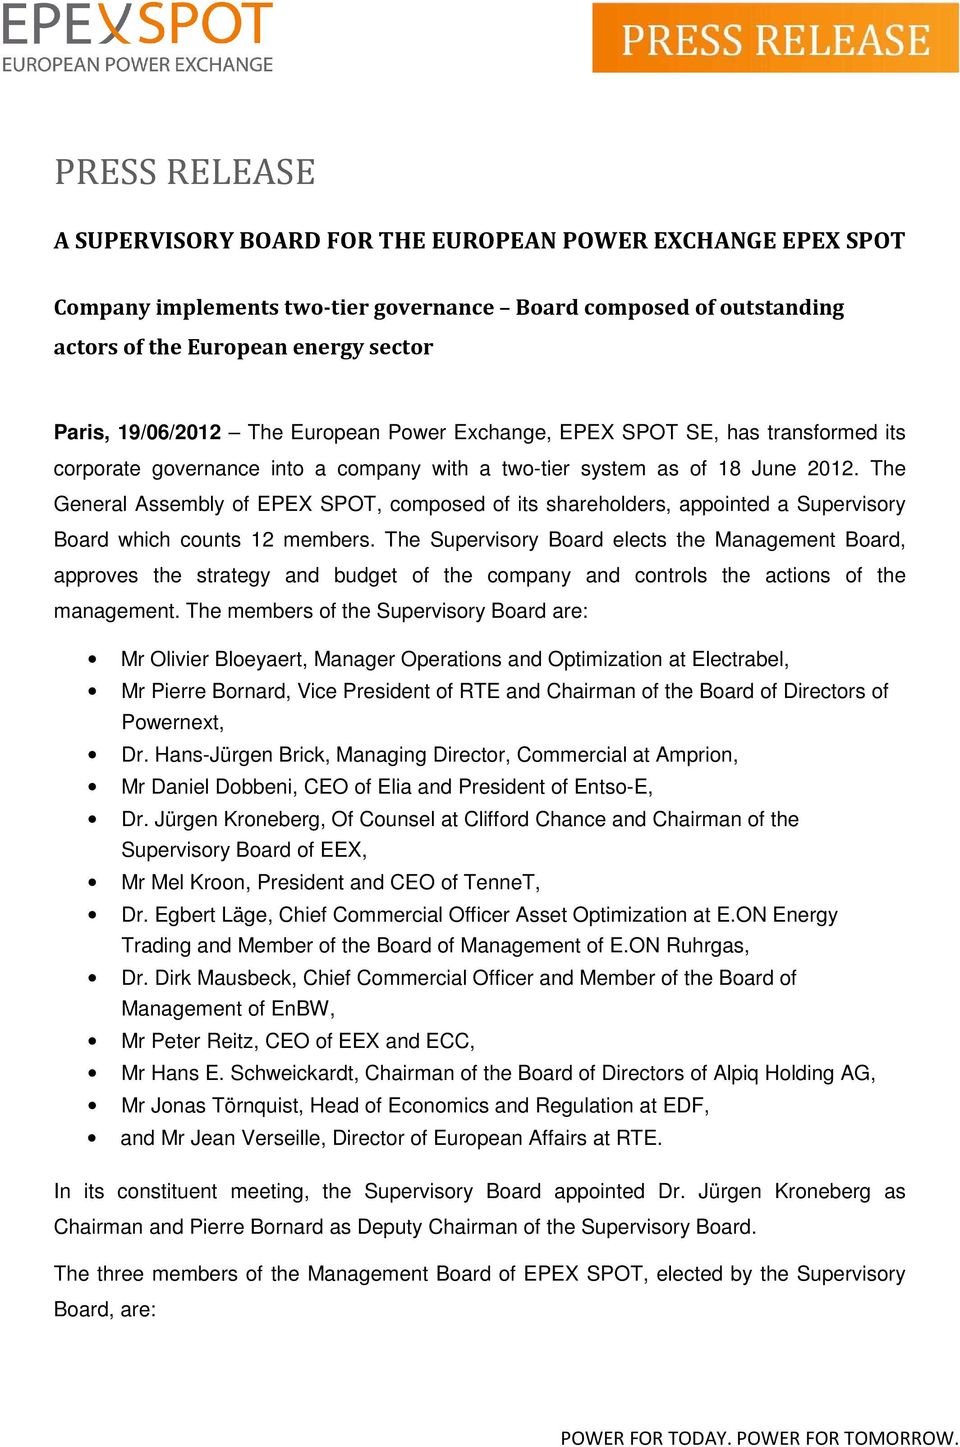 The General Assembly of EPEX SPOT, composed of its shareholders, appointed a Supervisory Board which counts 12 members.